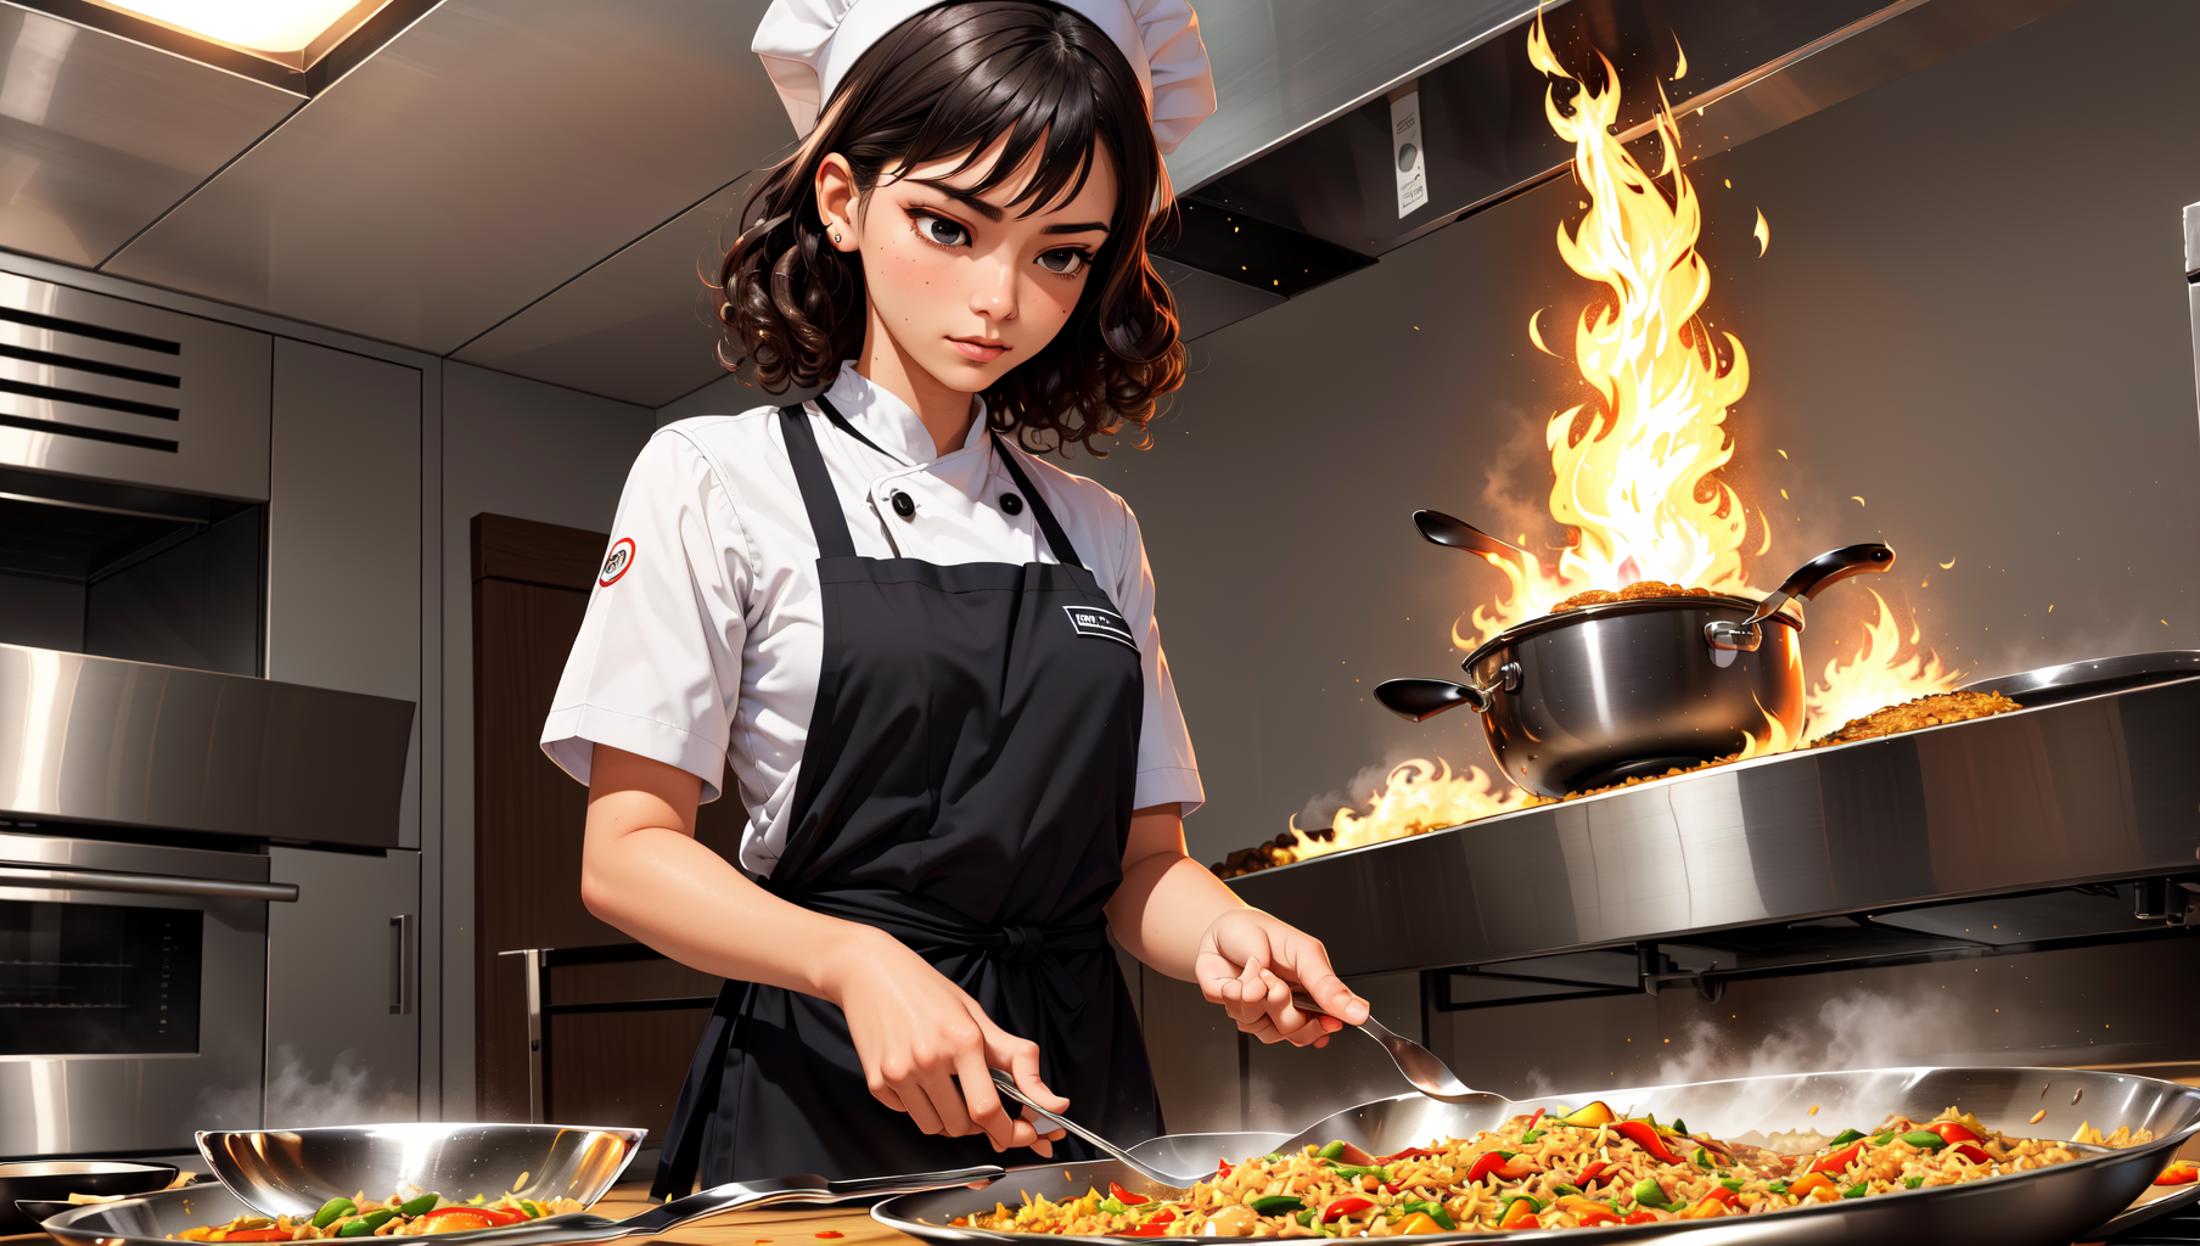 A 3D animated chef is cooking in a kitchen, stirring food in a wok.